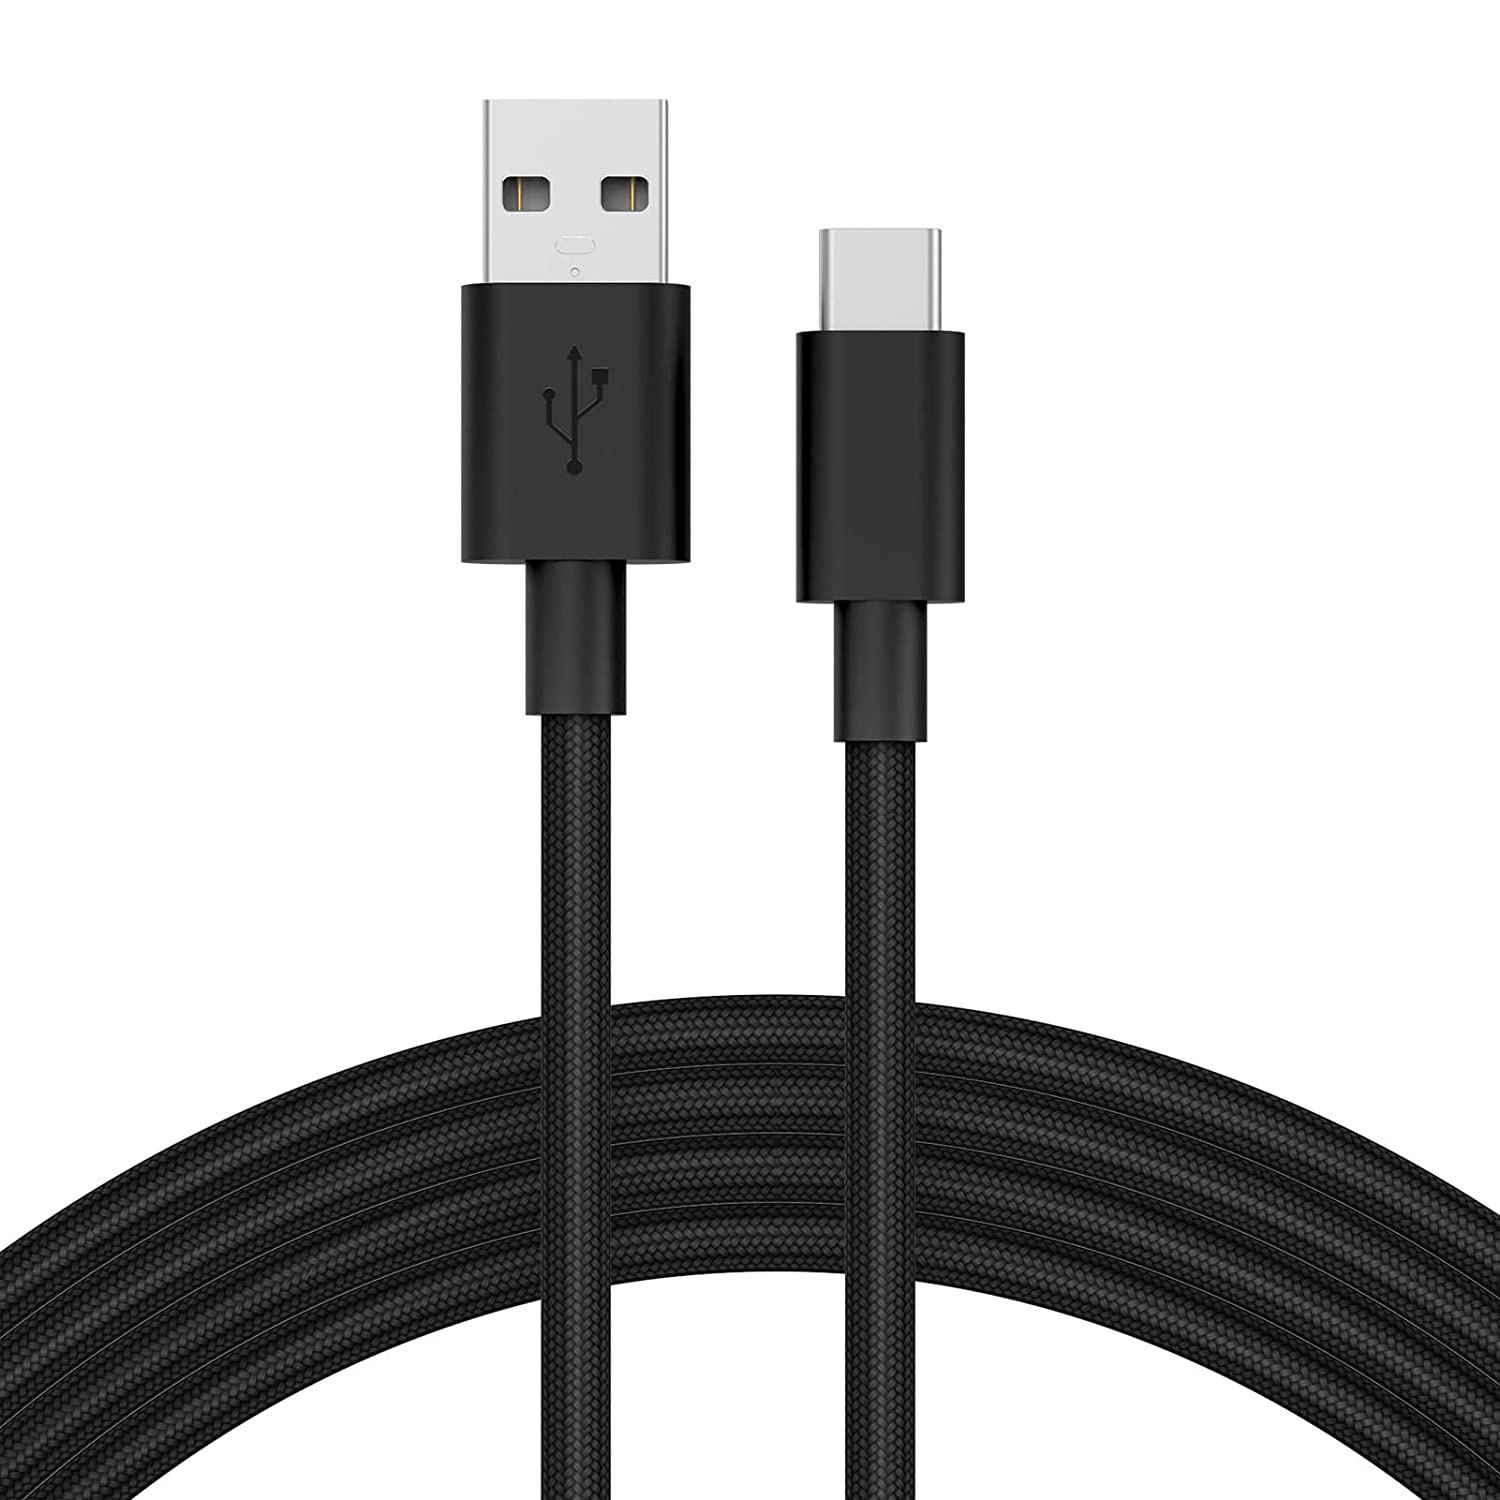 3ft USB C Cable, USB-A to USB-C Cable, Nylon Braided 3.1A QC 3.0 Fast Charging Type C Cord for Samsung Galaxy S21 S20 S10 A10 Note 10, LG, Motorola, PS5 Controller, and More